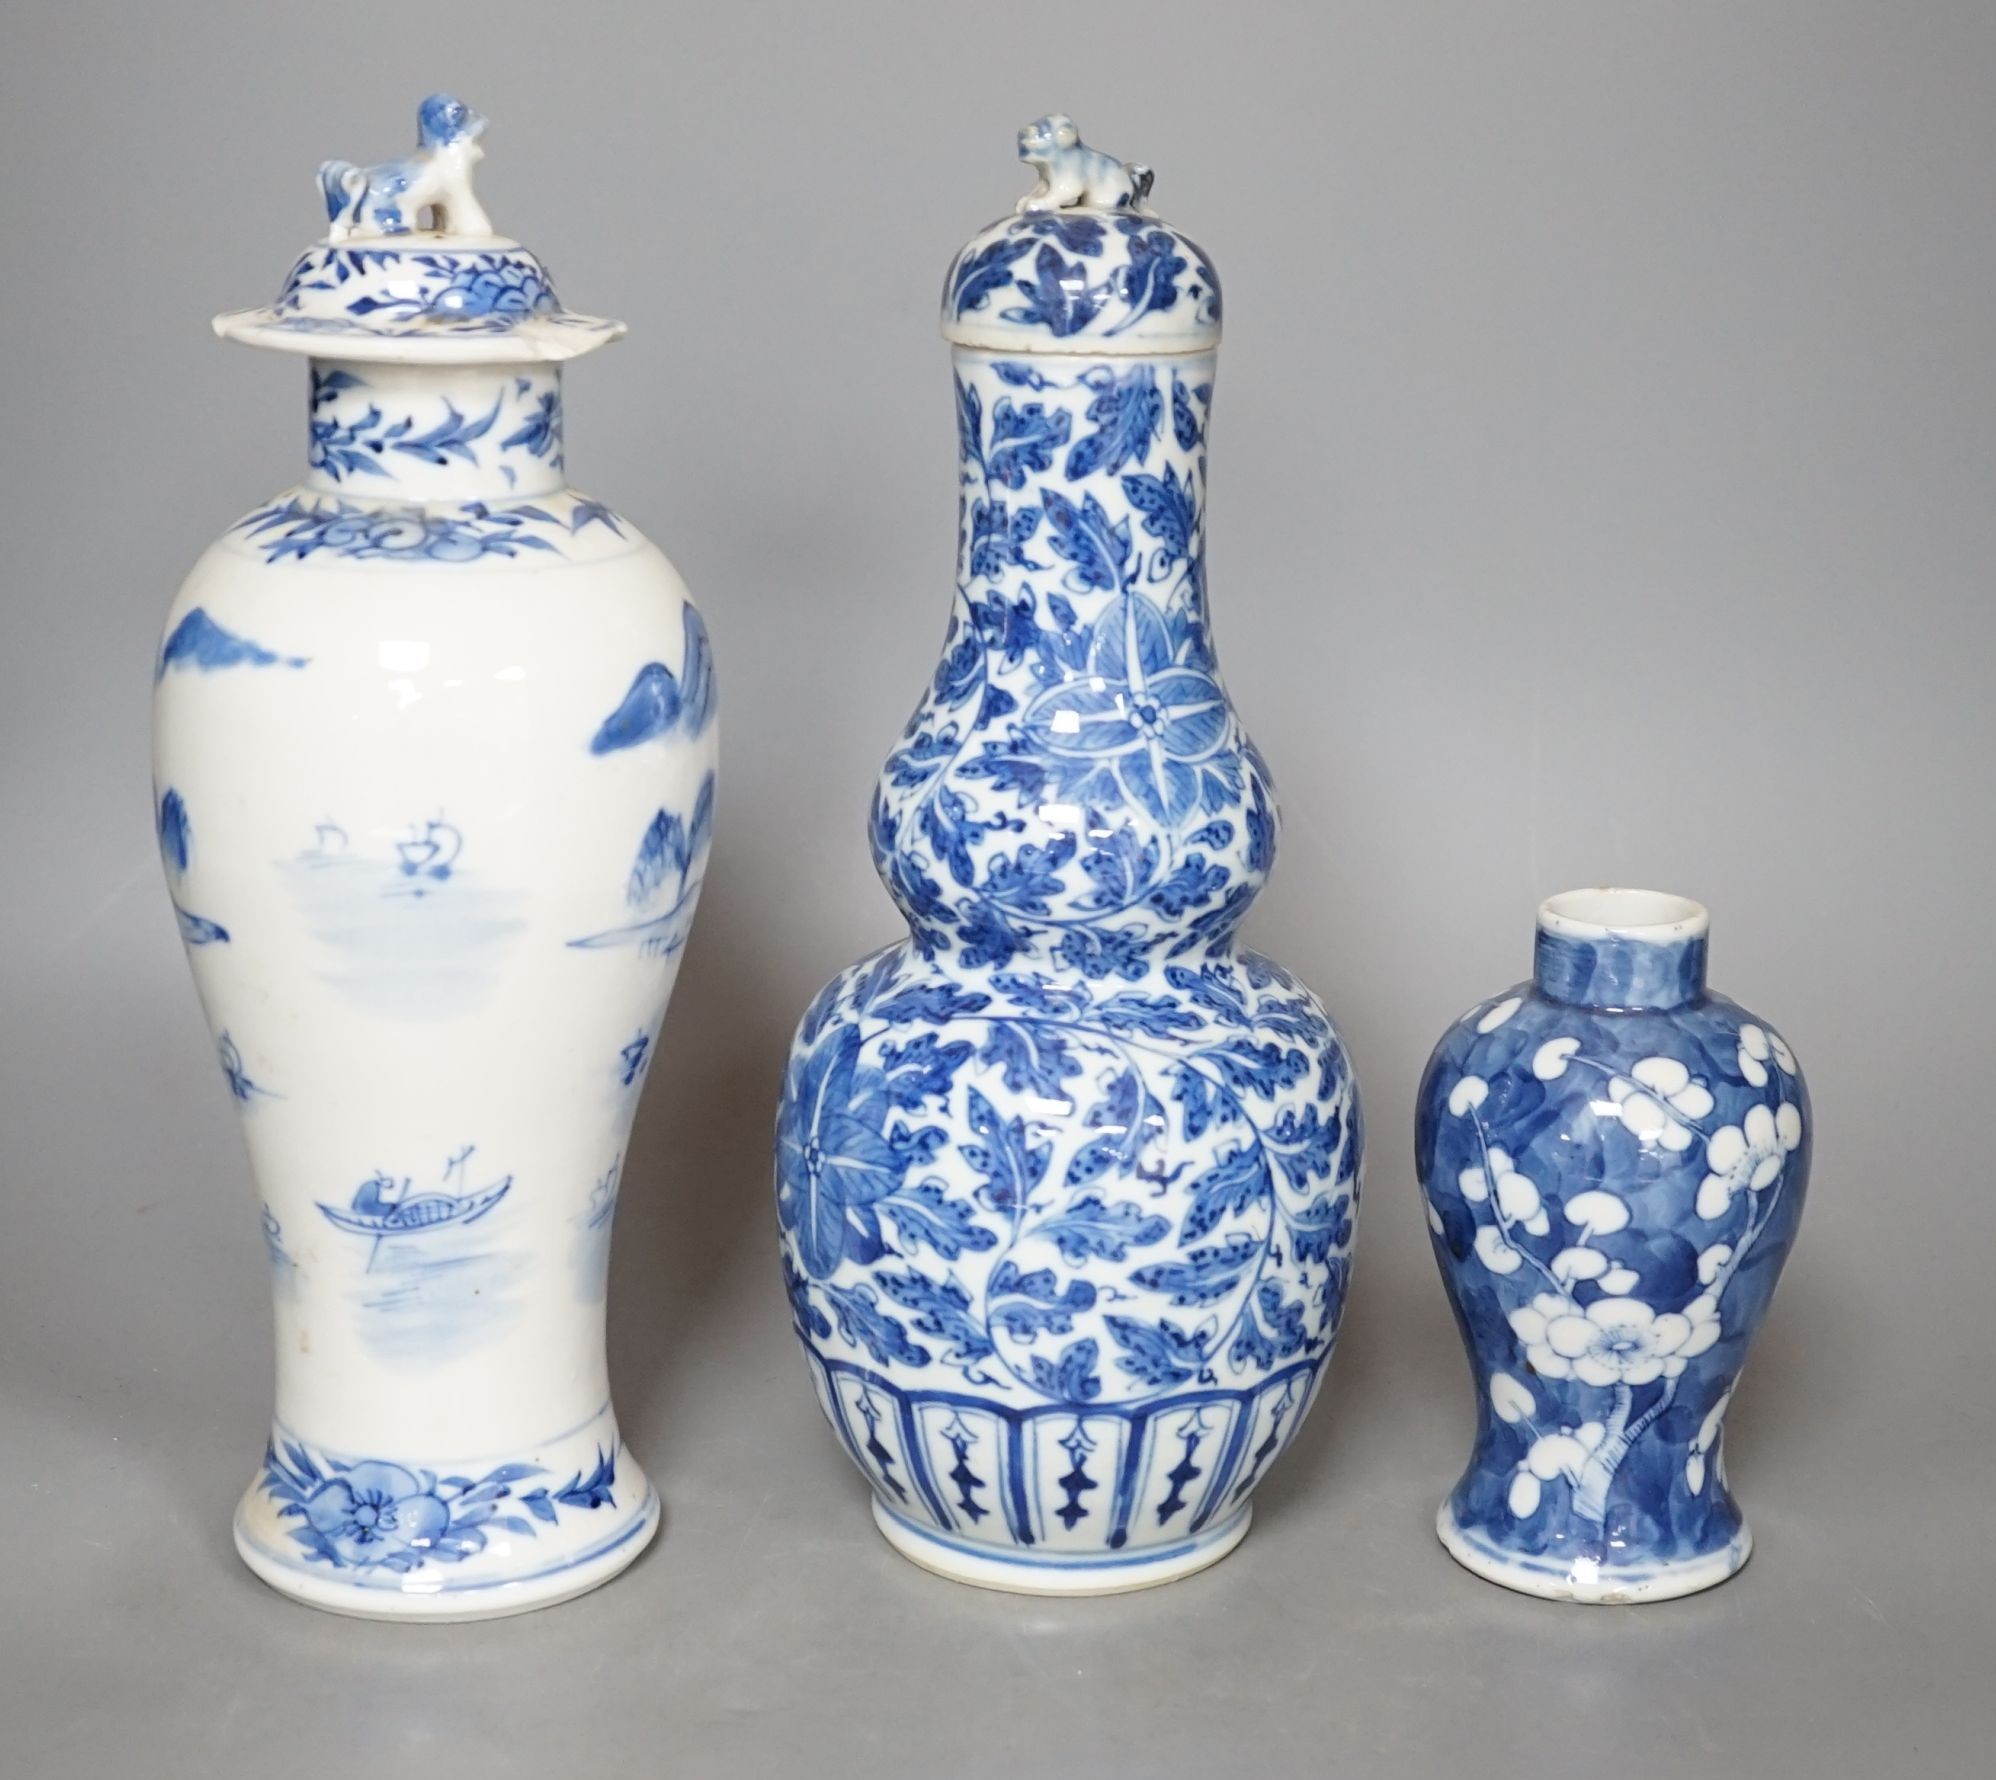 A Chinese double gourd vase and cover, a similar vase and cover and a prunus vase, all 19th century, tallest 28 cms high.